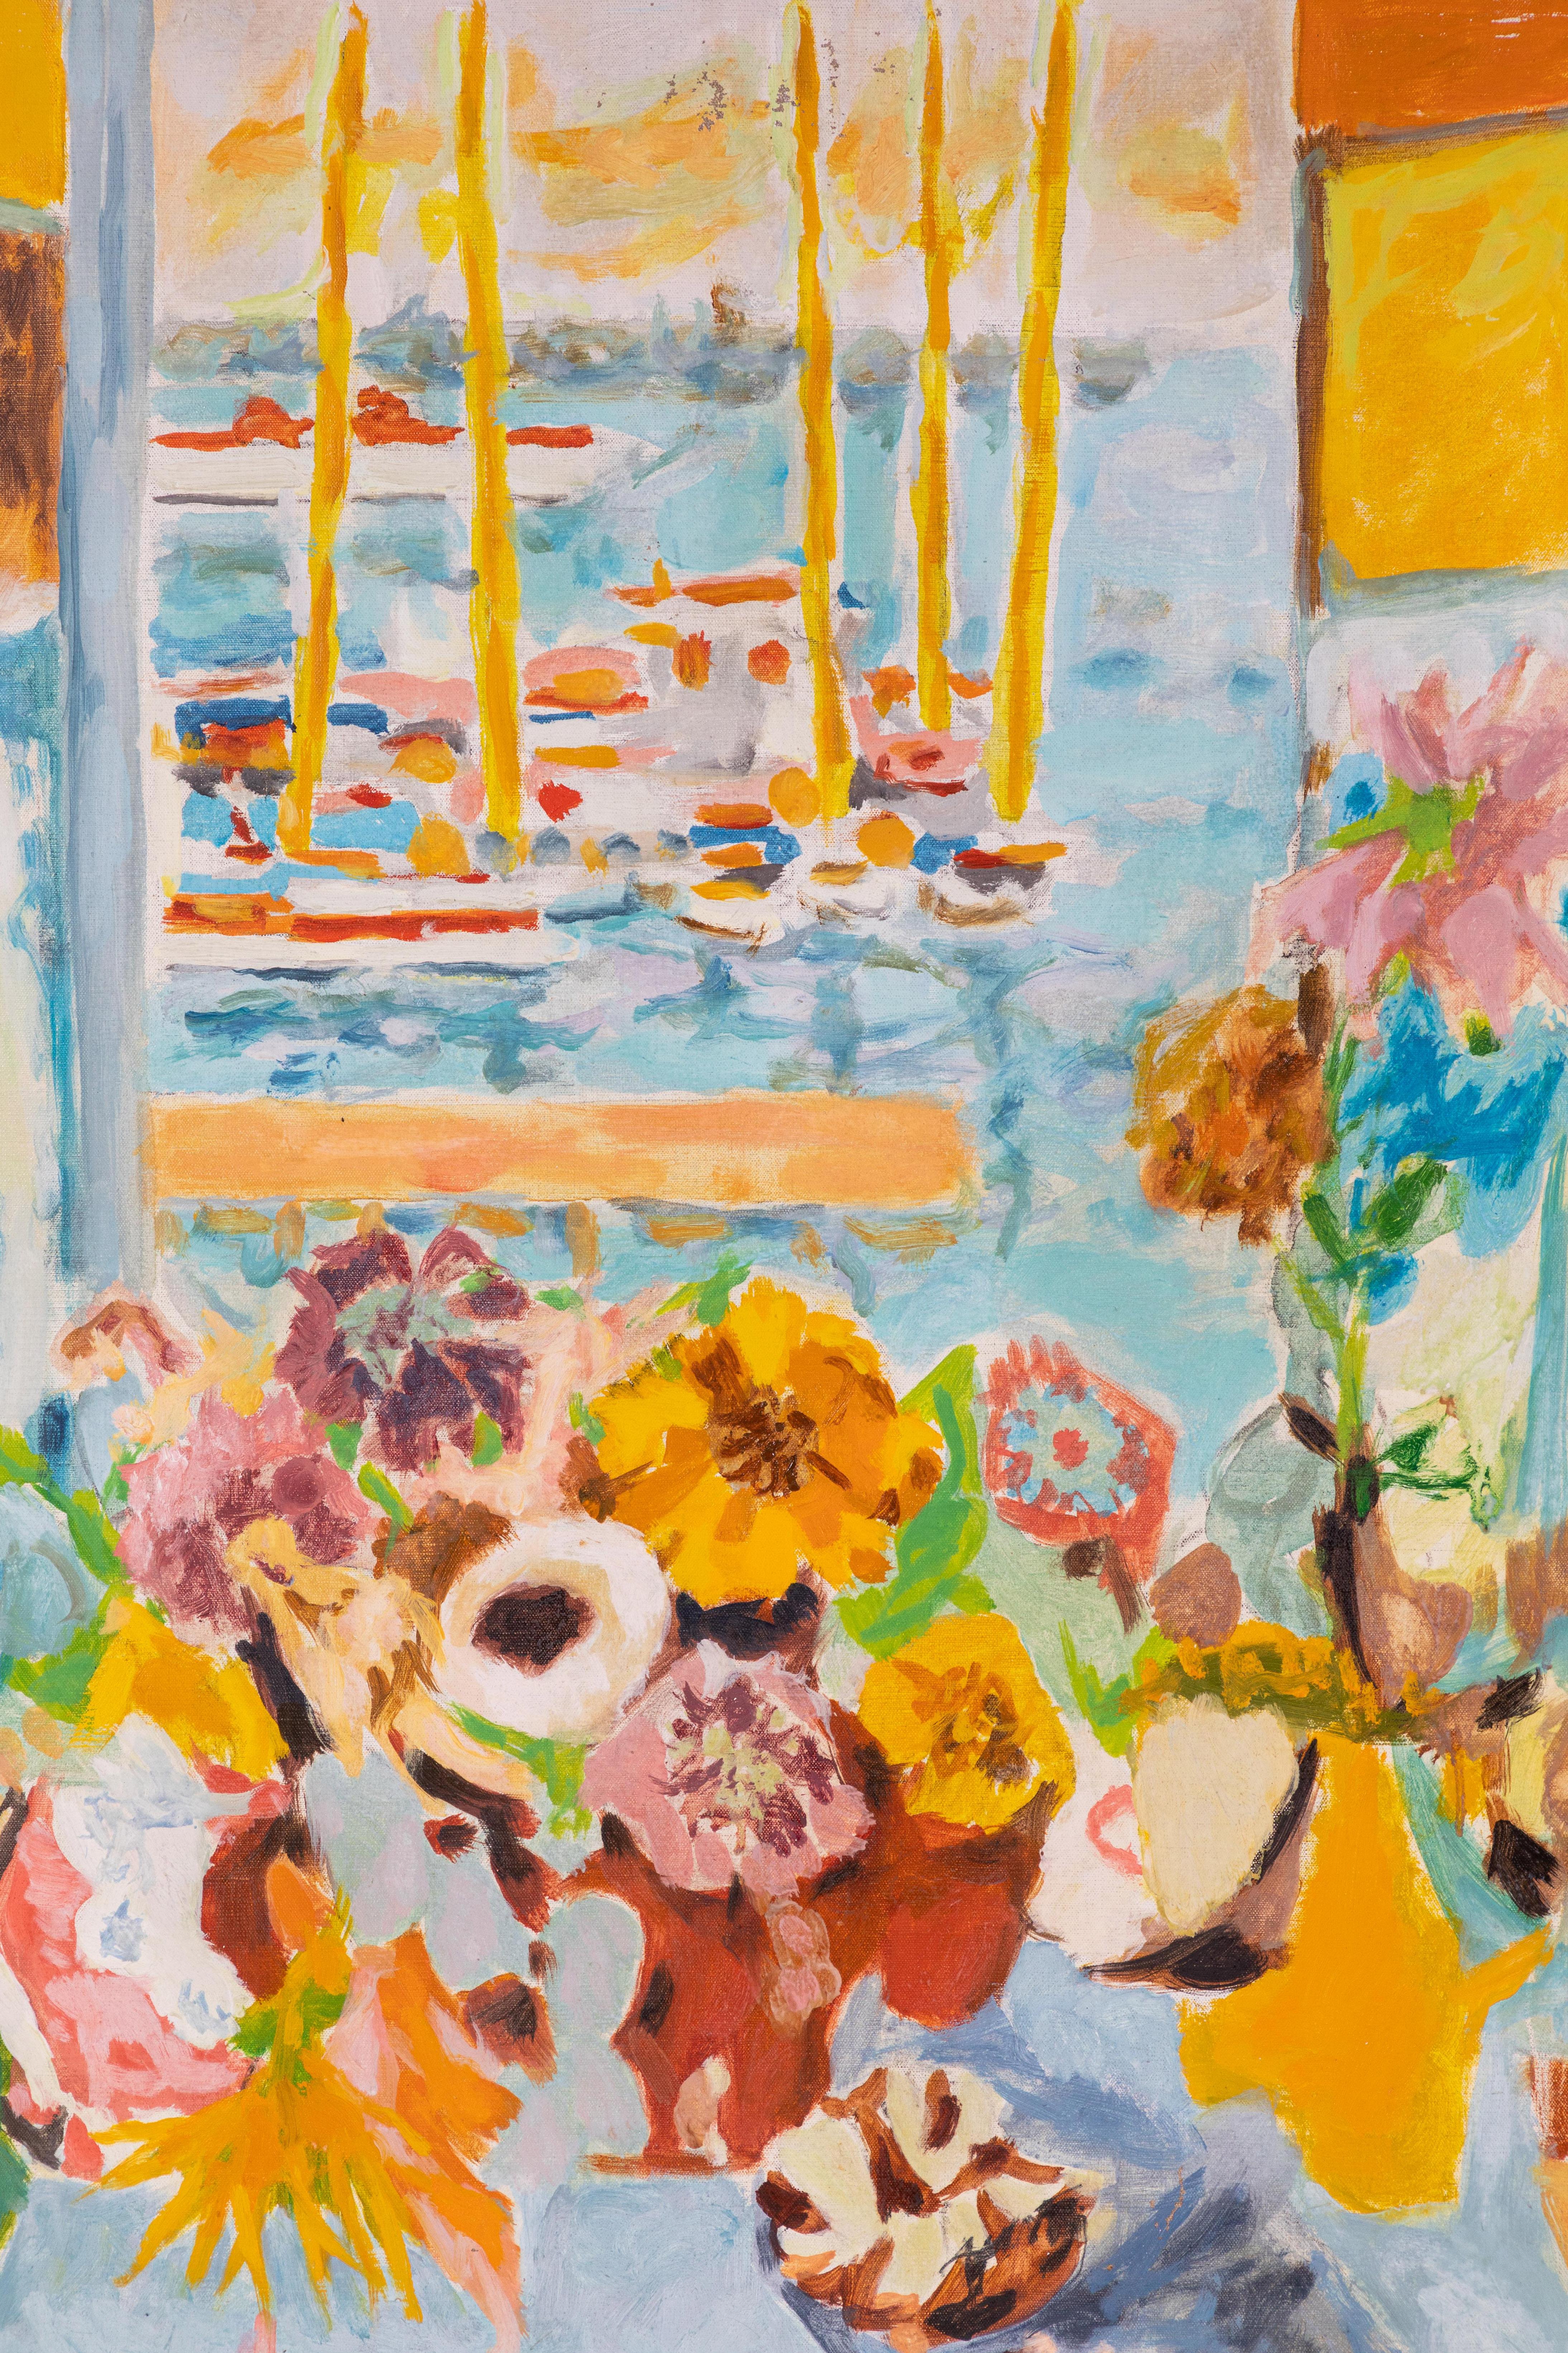 Signed, bright, highly desirable oil-on-canvas painting of flowers in front of open window, overlooking moored boats. 